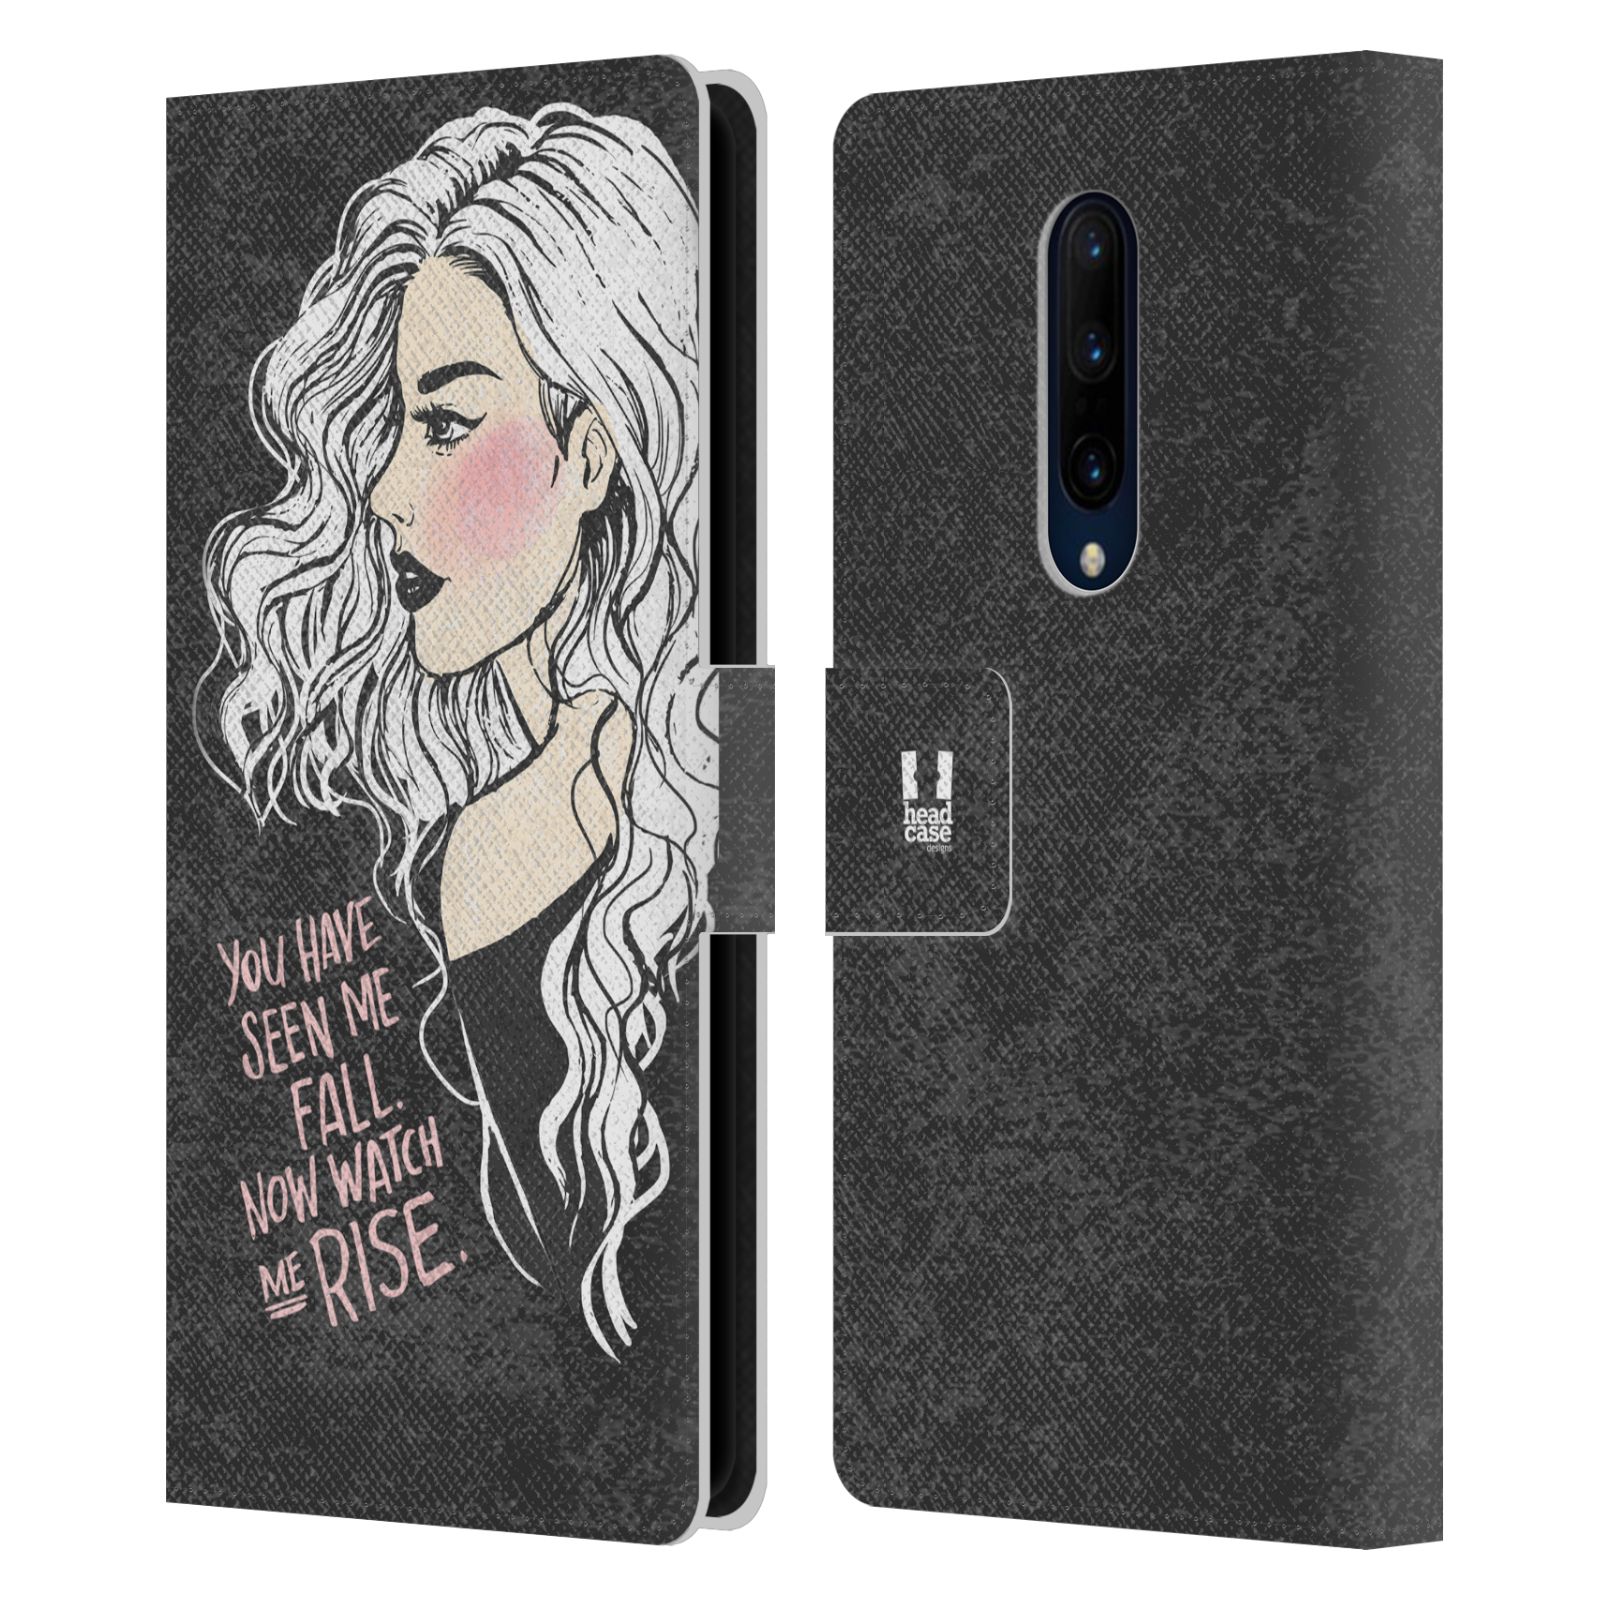 Pouzdro na mobil OnePlus 7 PRO  - HEAD CASE - Fall and Rise